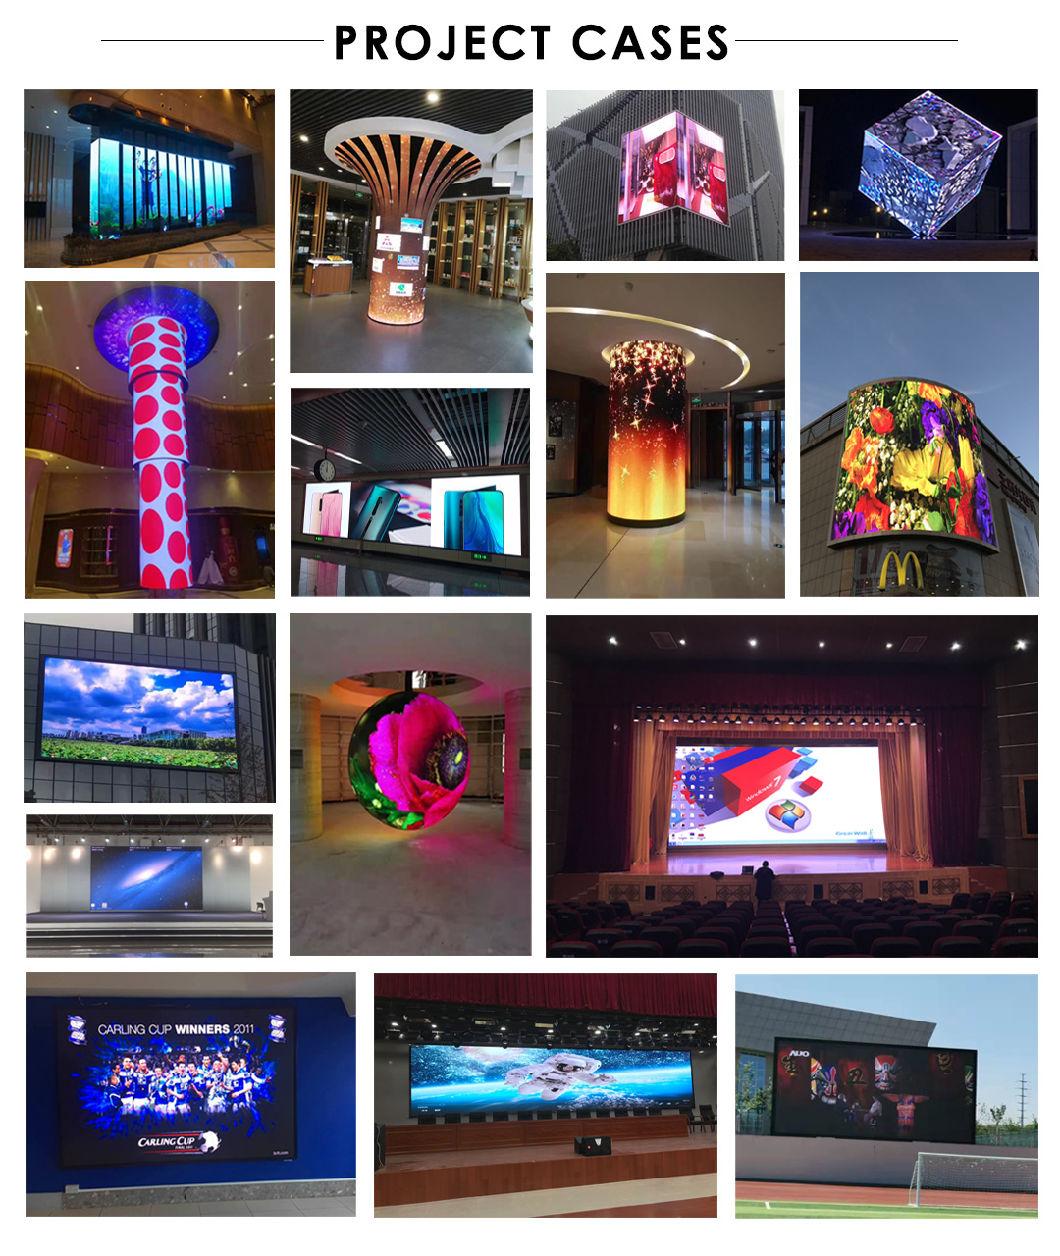 Indoor P4 P5 P6 P10 High Energy Saving Colorful LED Display Screen